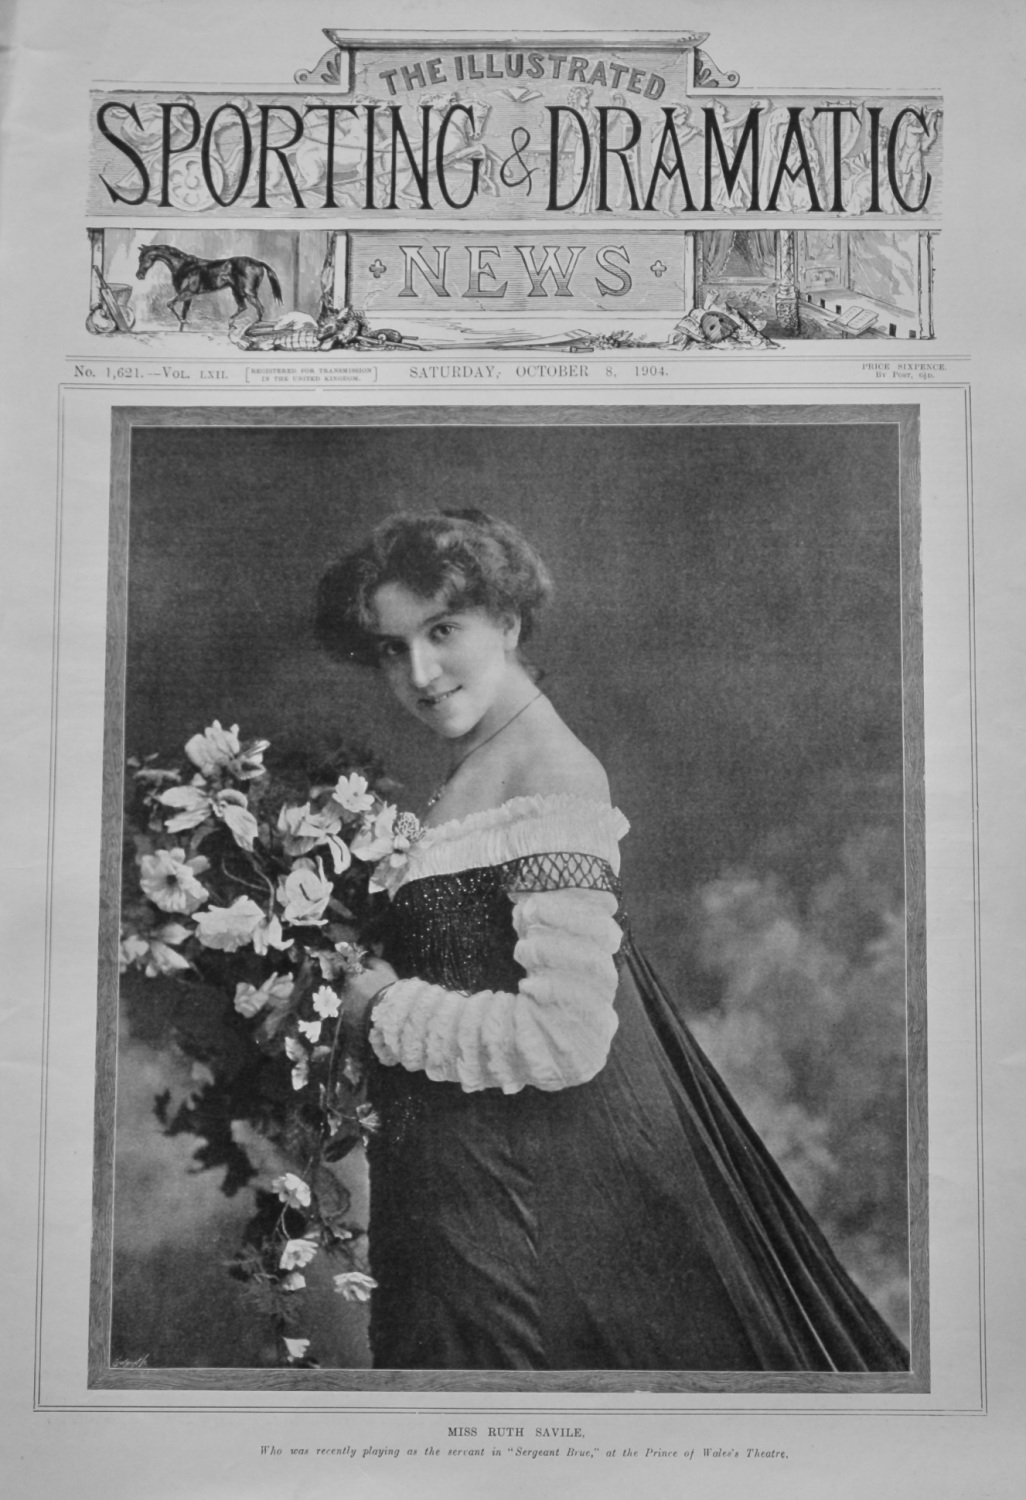 Illustrated Sporting and Dramatic News,  October 8th, 1901.